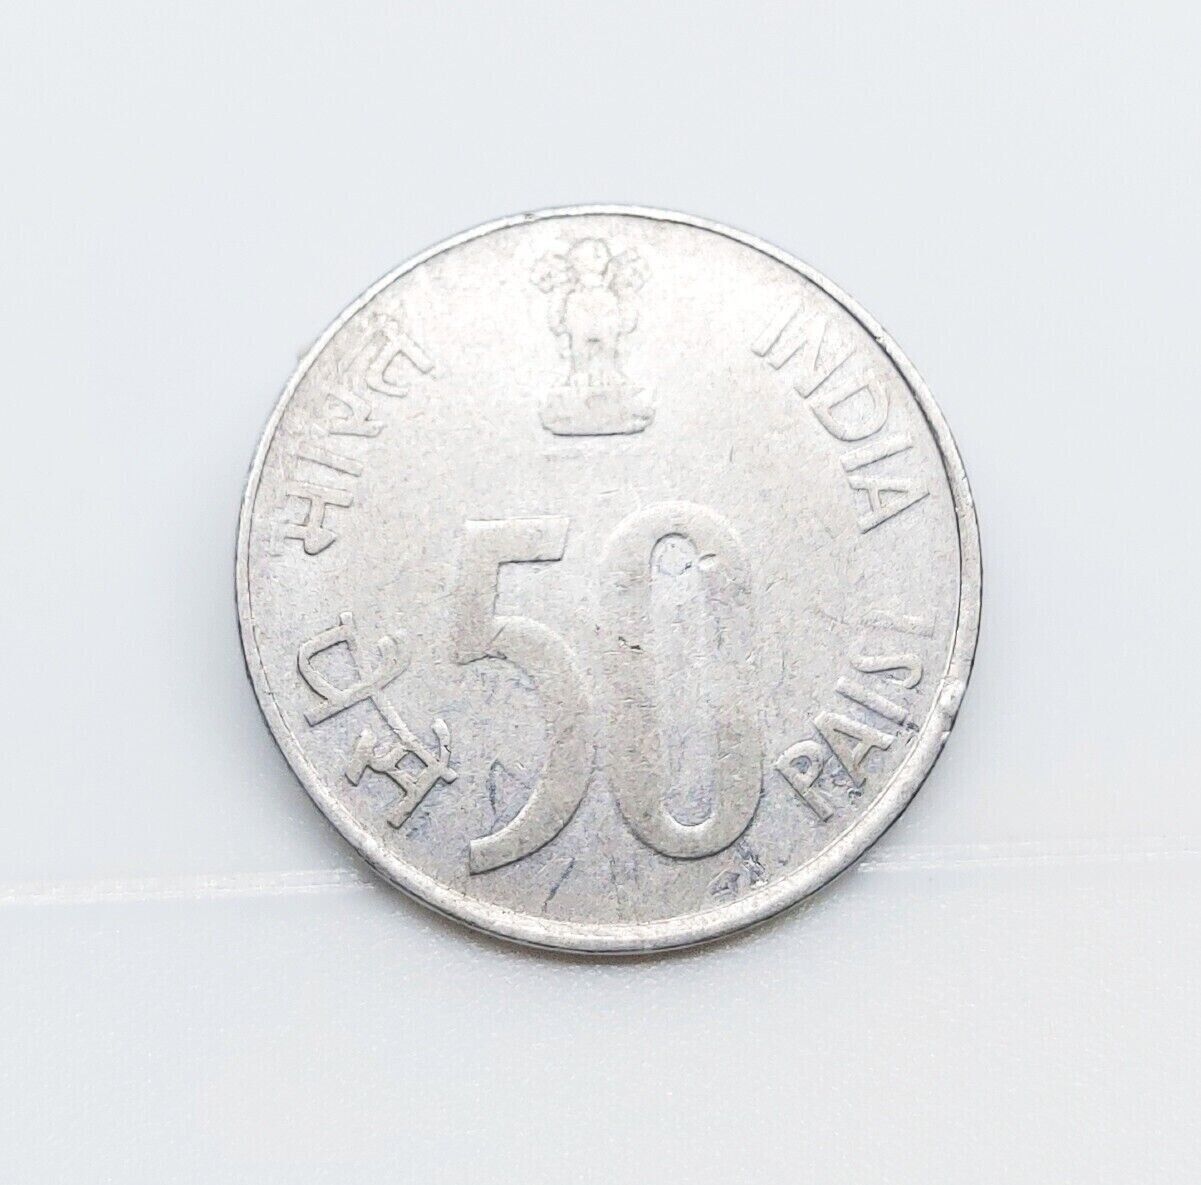 Indian 50 Paise Coin 1998 Year 100% Original